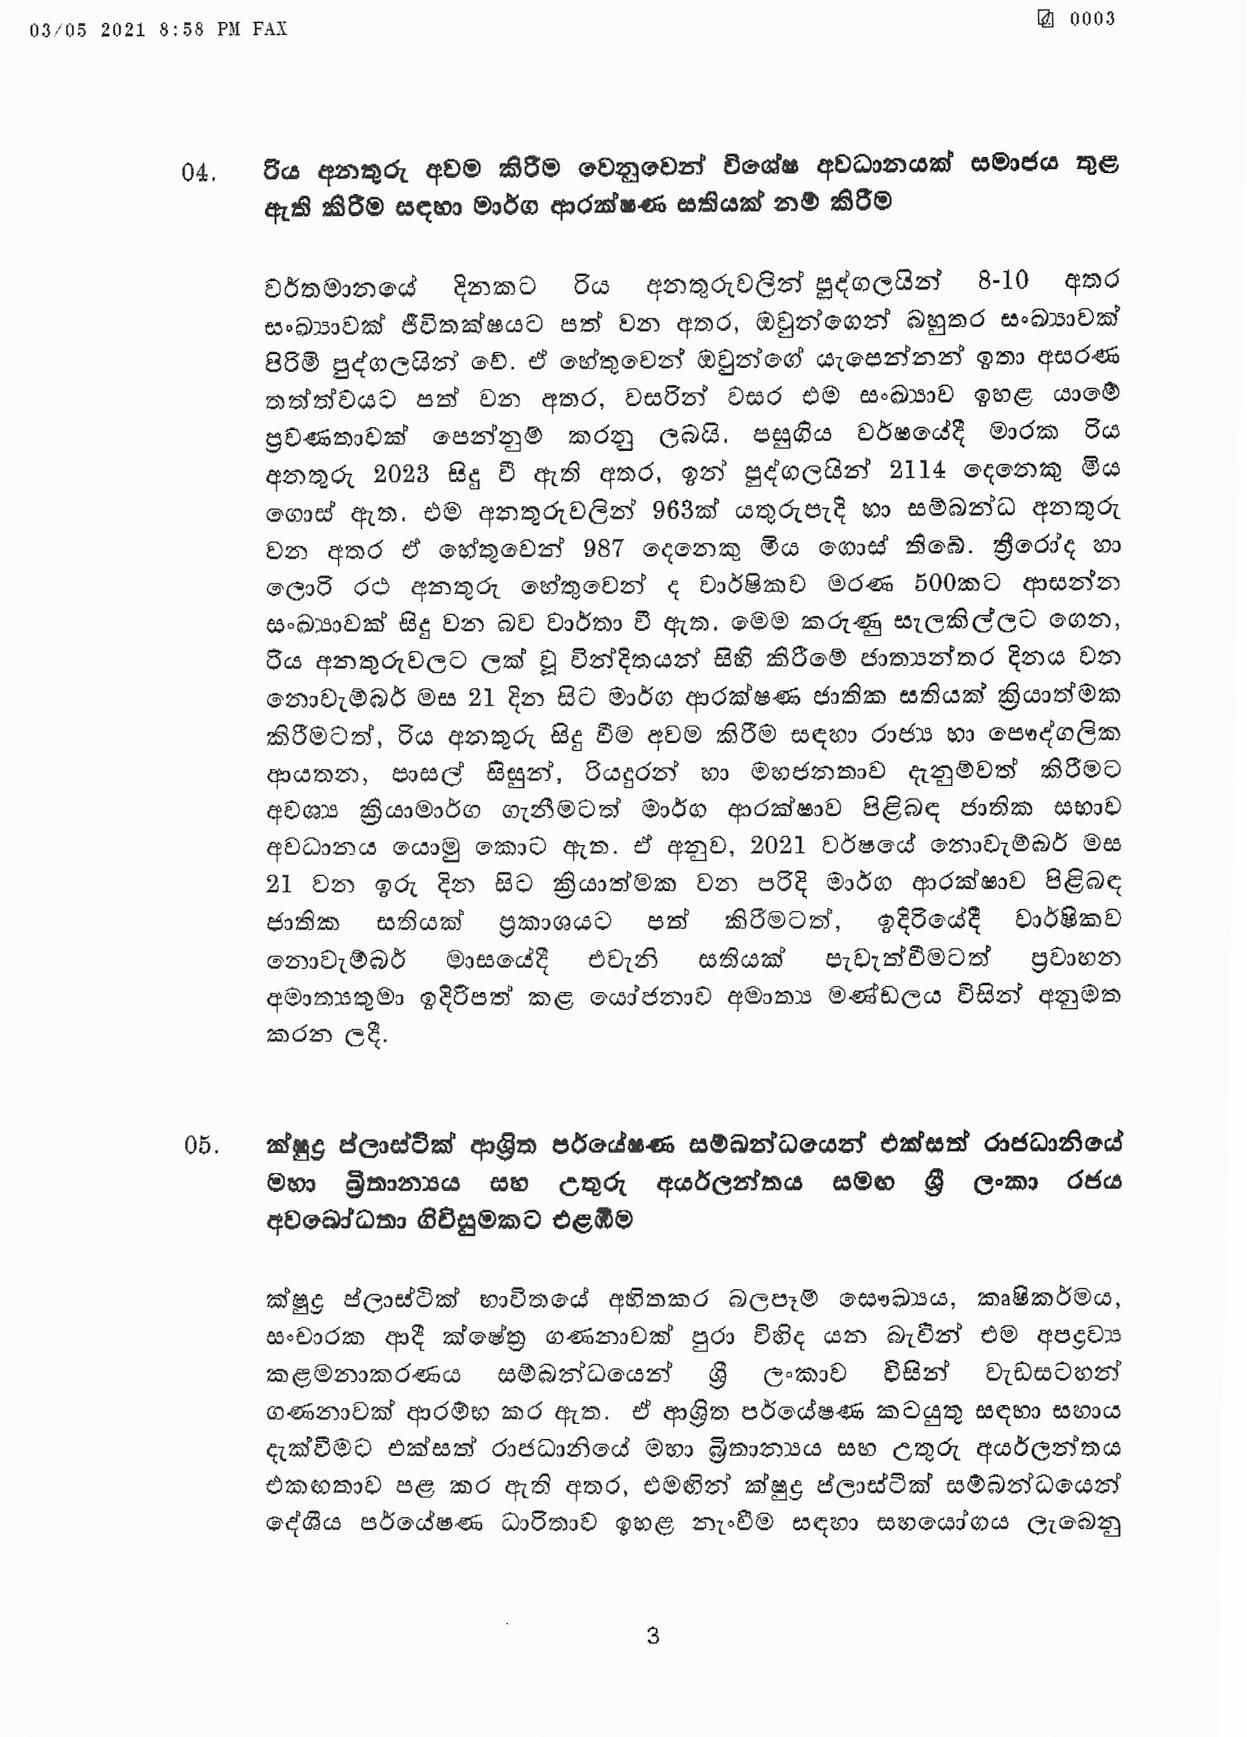 Cabinet Decision on 03.05.2021 page 003